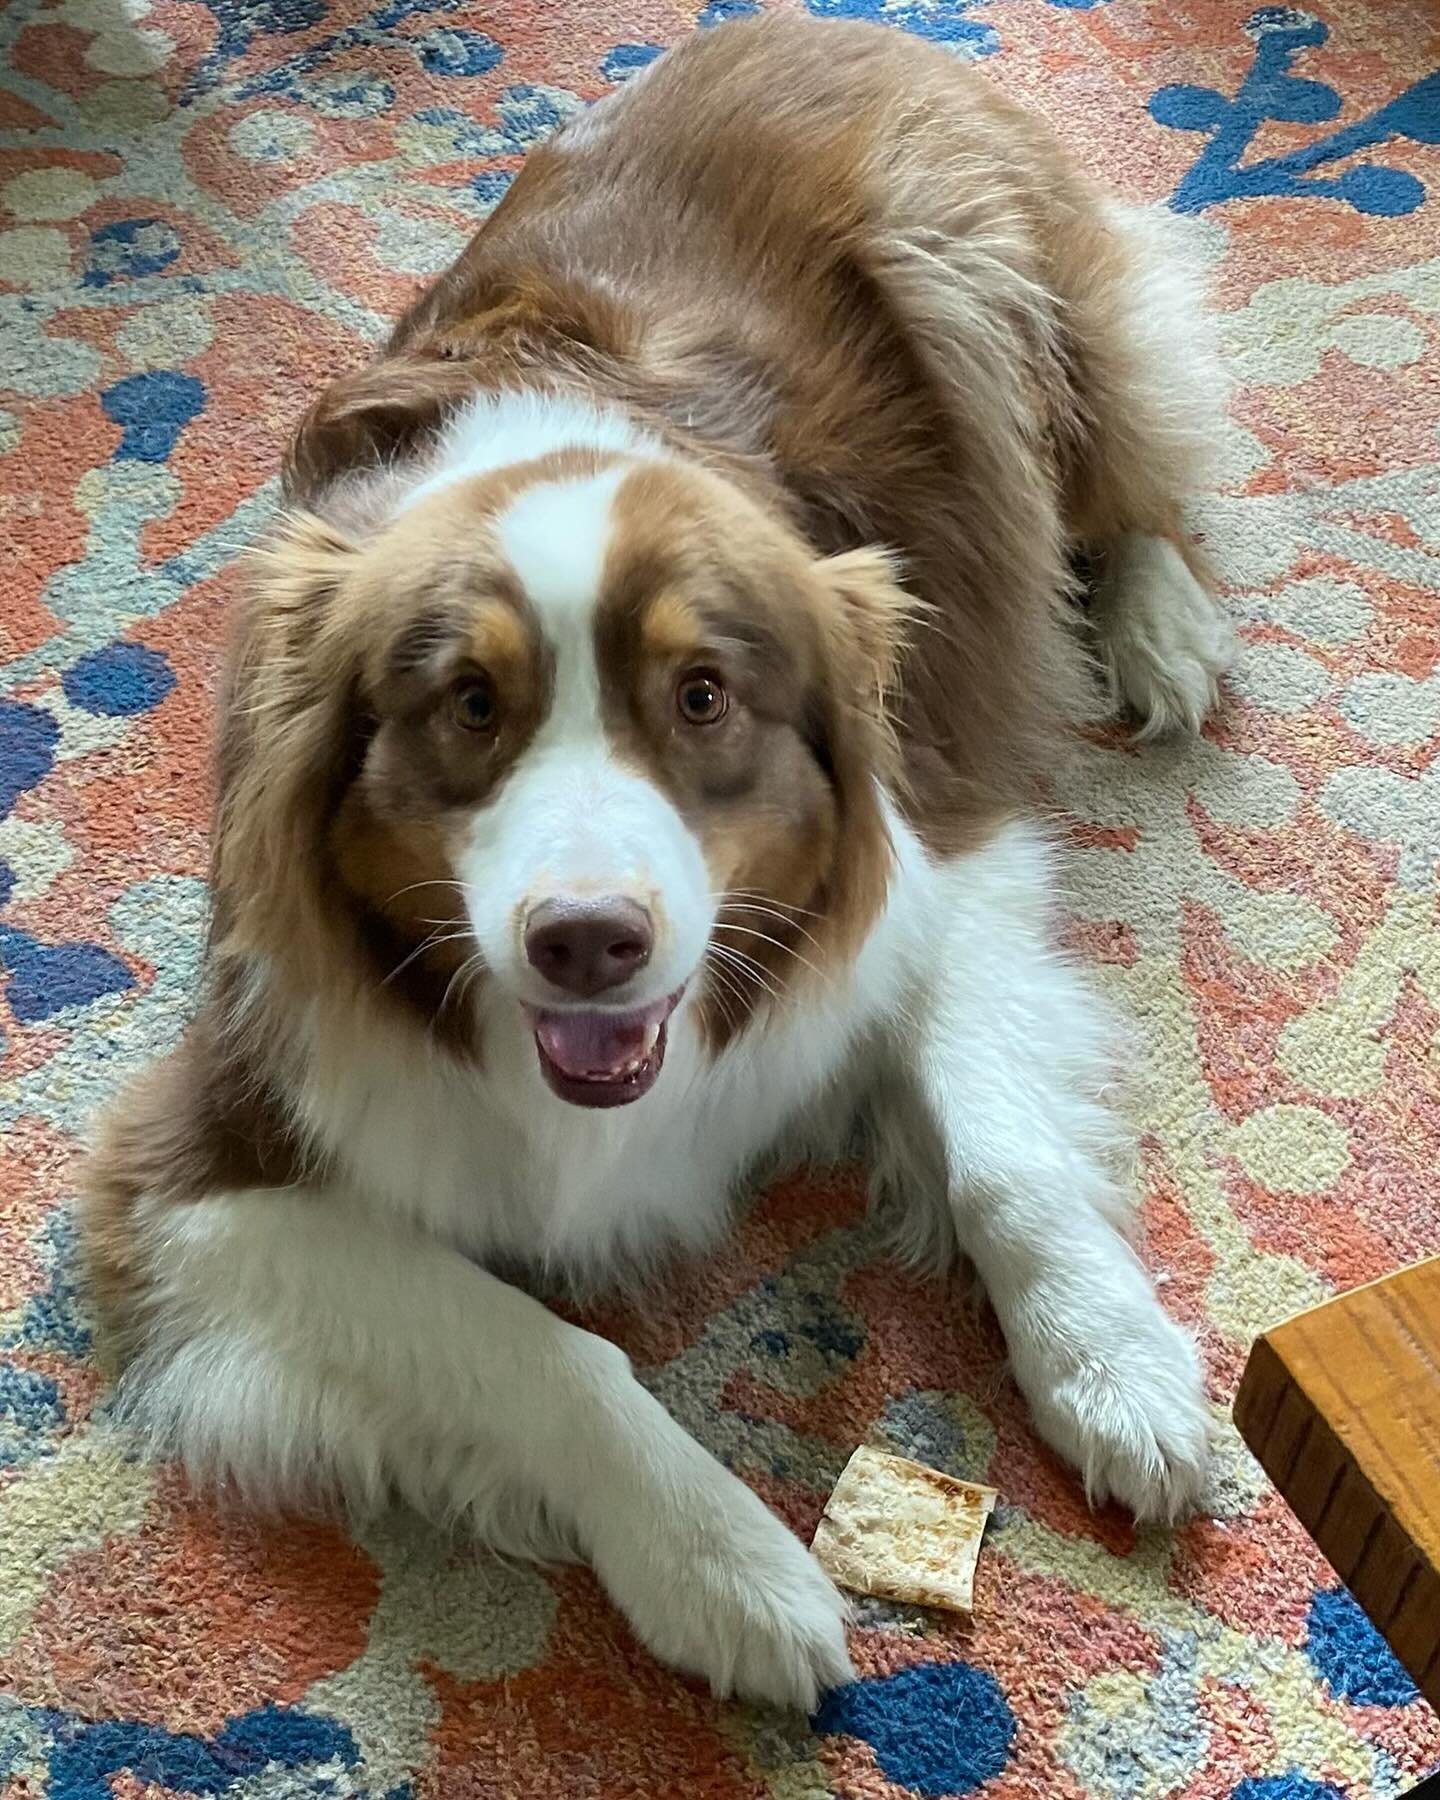 Say Hello to Maggie! A 5.5 yr old Aussie Shepherd who is very sensitive to loud random noises in her neighborhood both inside and outside the home. She has challenges with small children, vacuums and smaller female dogs. Educated owners on how to cre